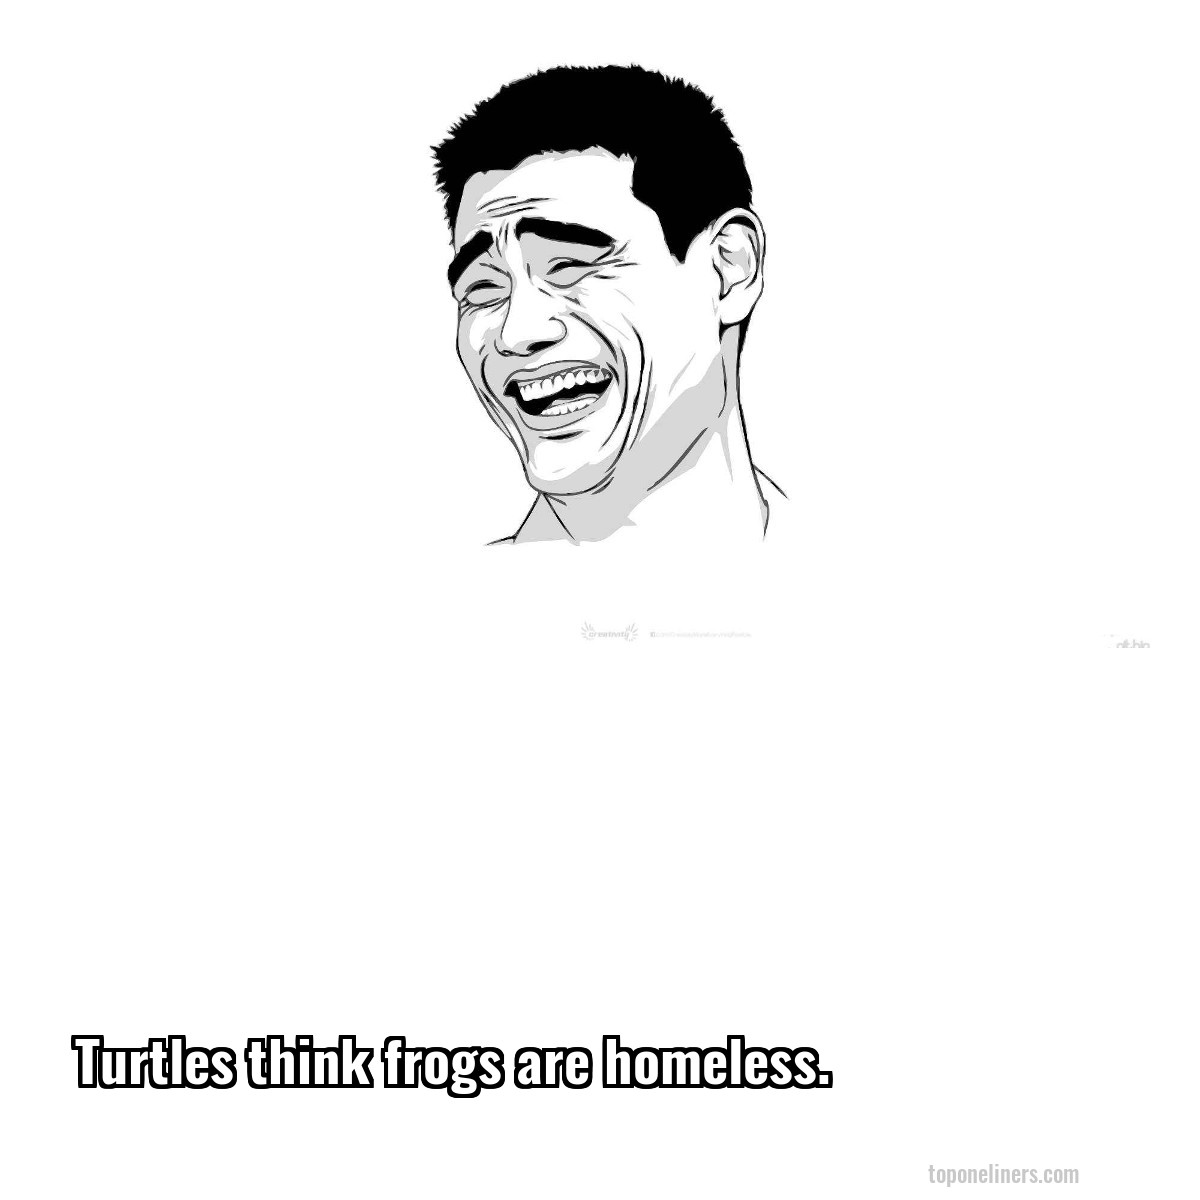 Turtles think frogs are homeless.
